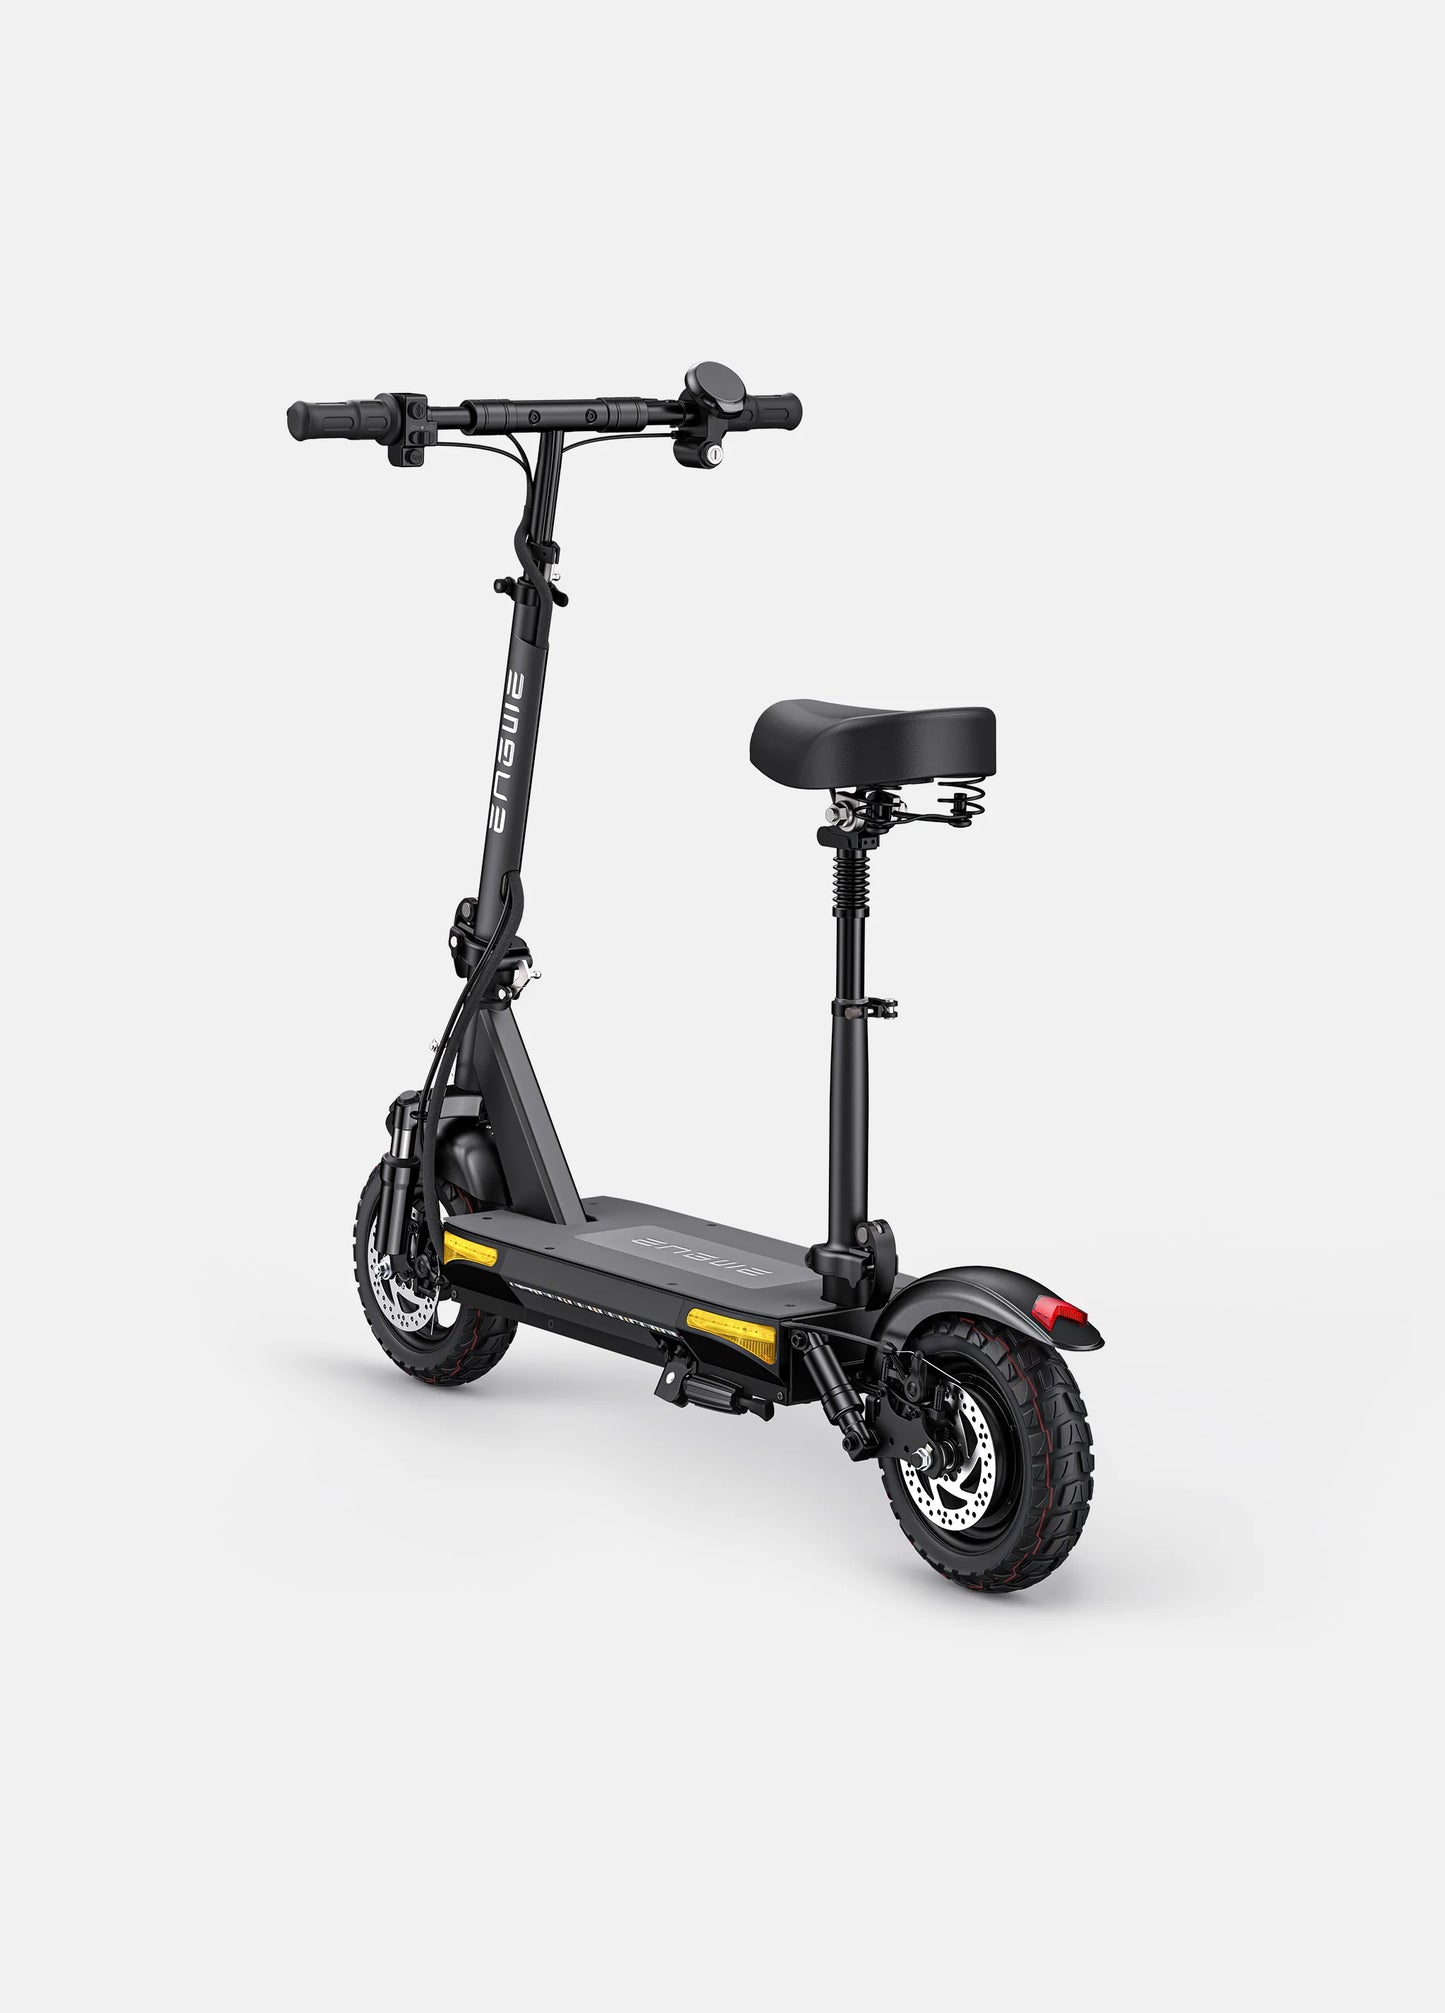 ENGWE S6 700W 37Miles Seated E-Scooter